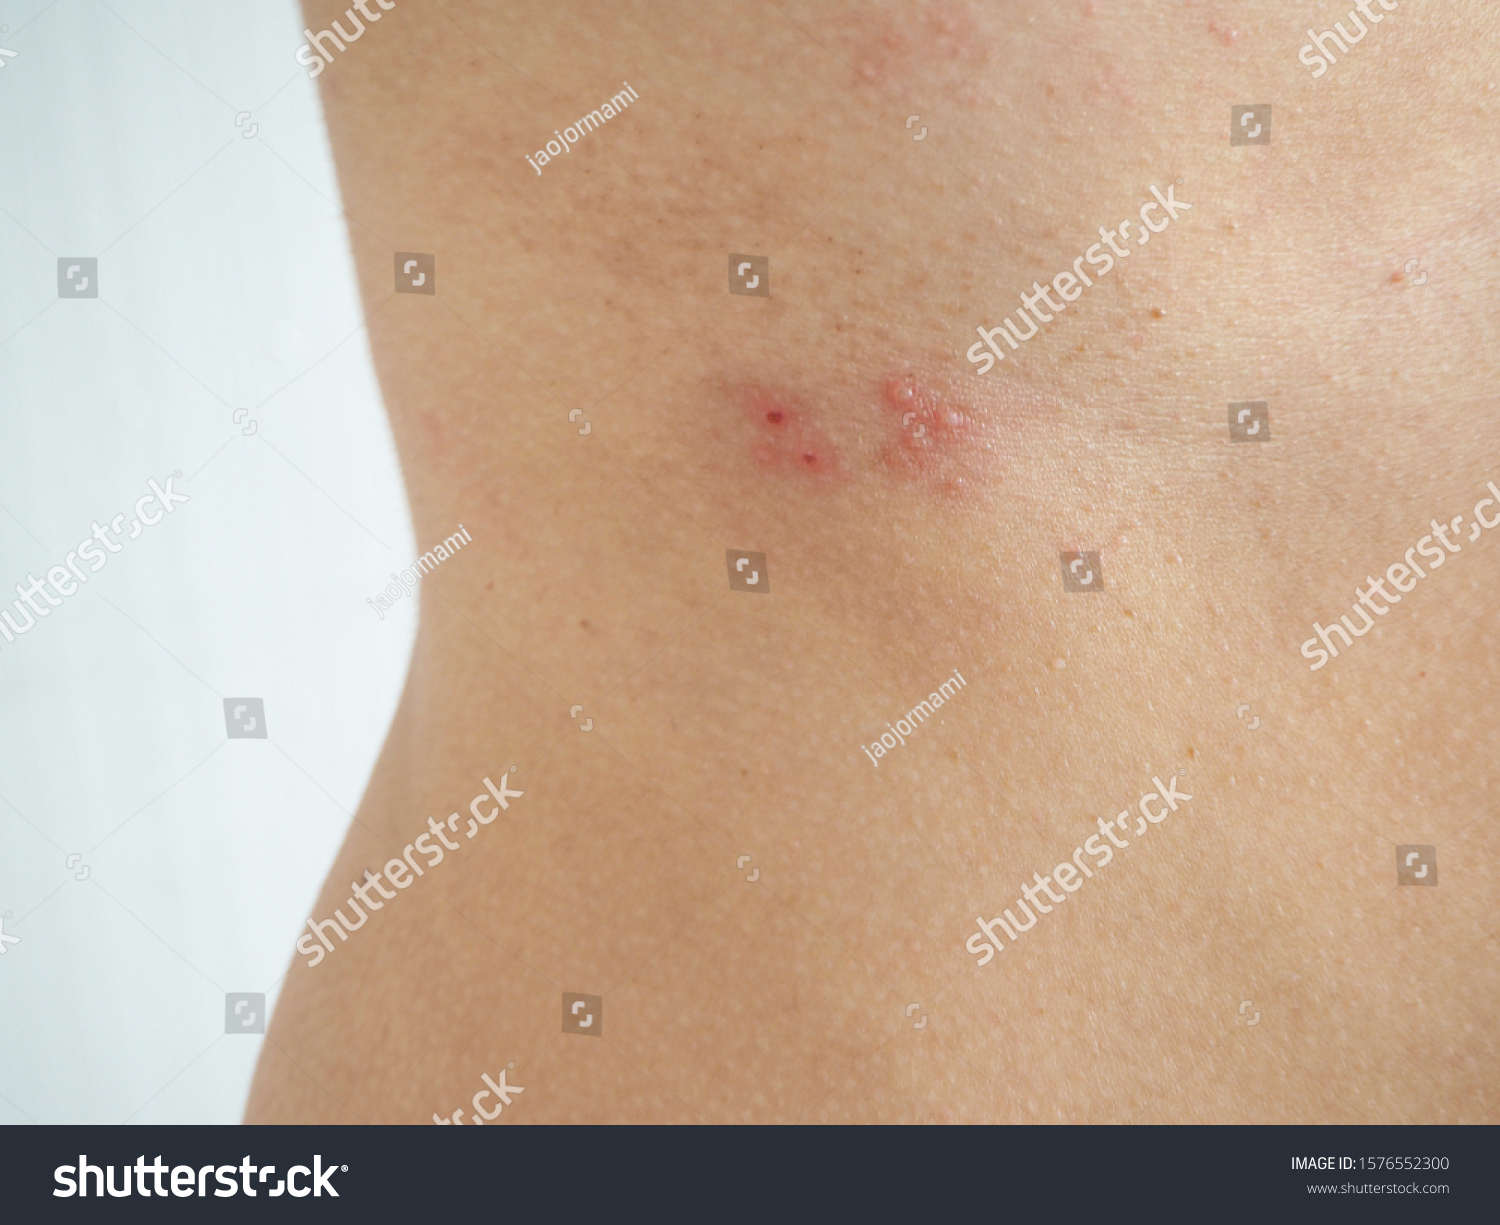 Herpes Zoster Shingles Woman On Her写真素材1576552300 Shutterstock 